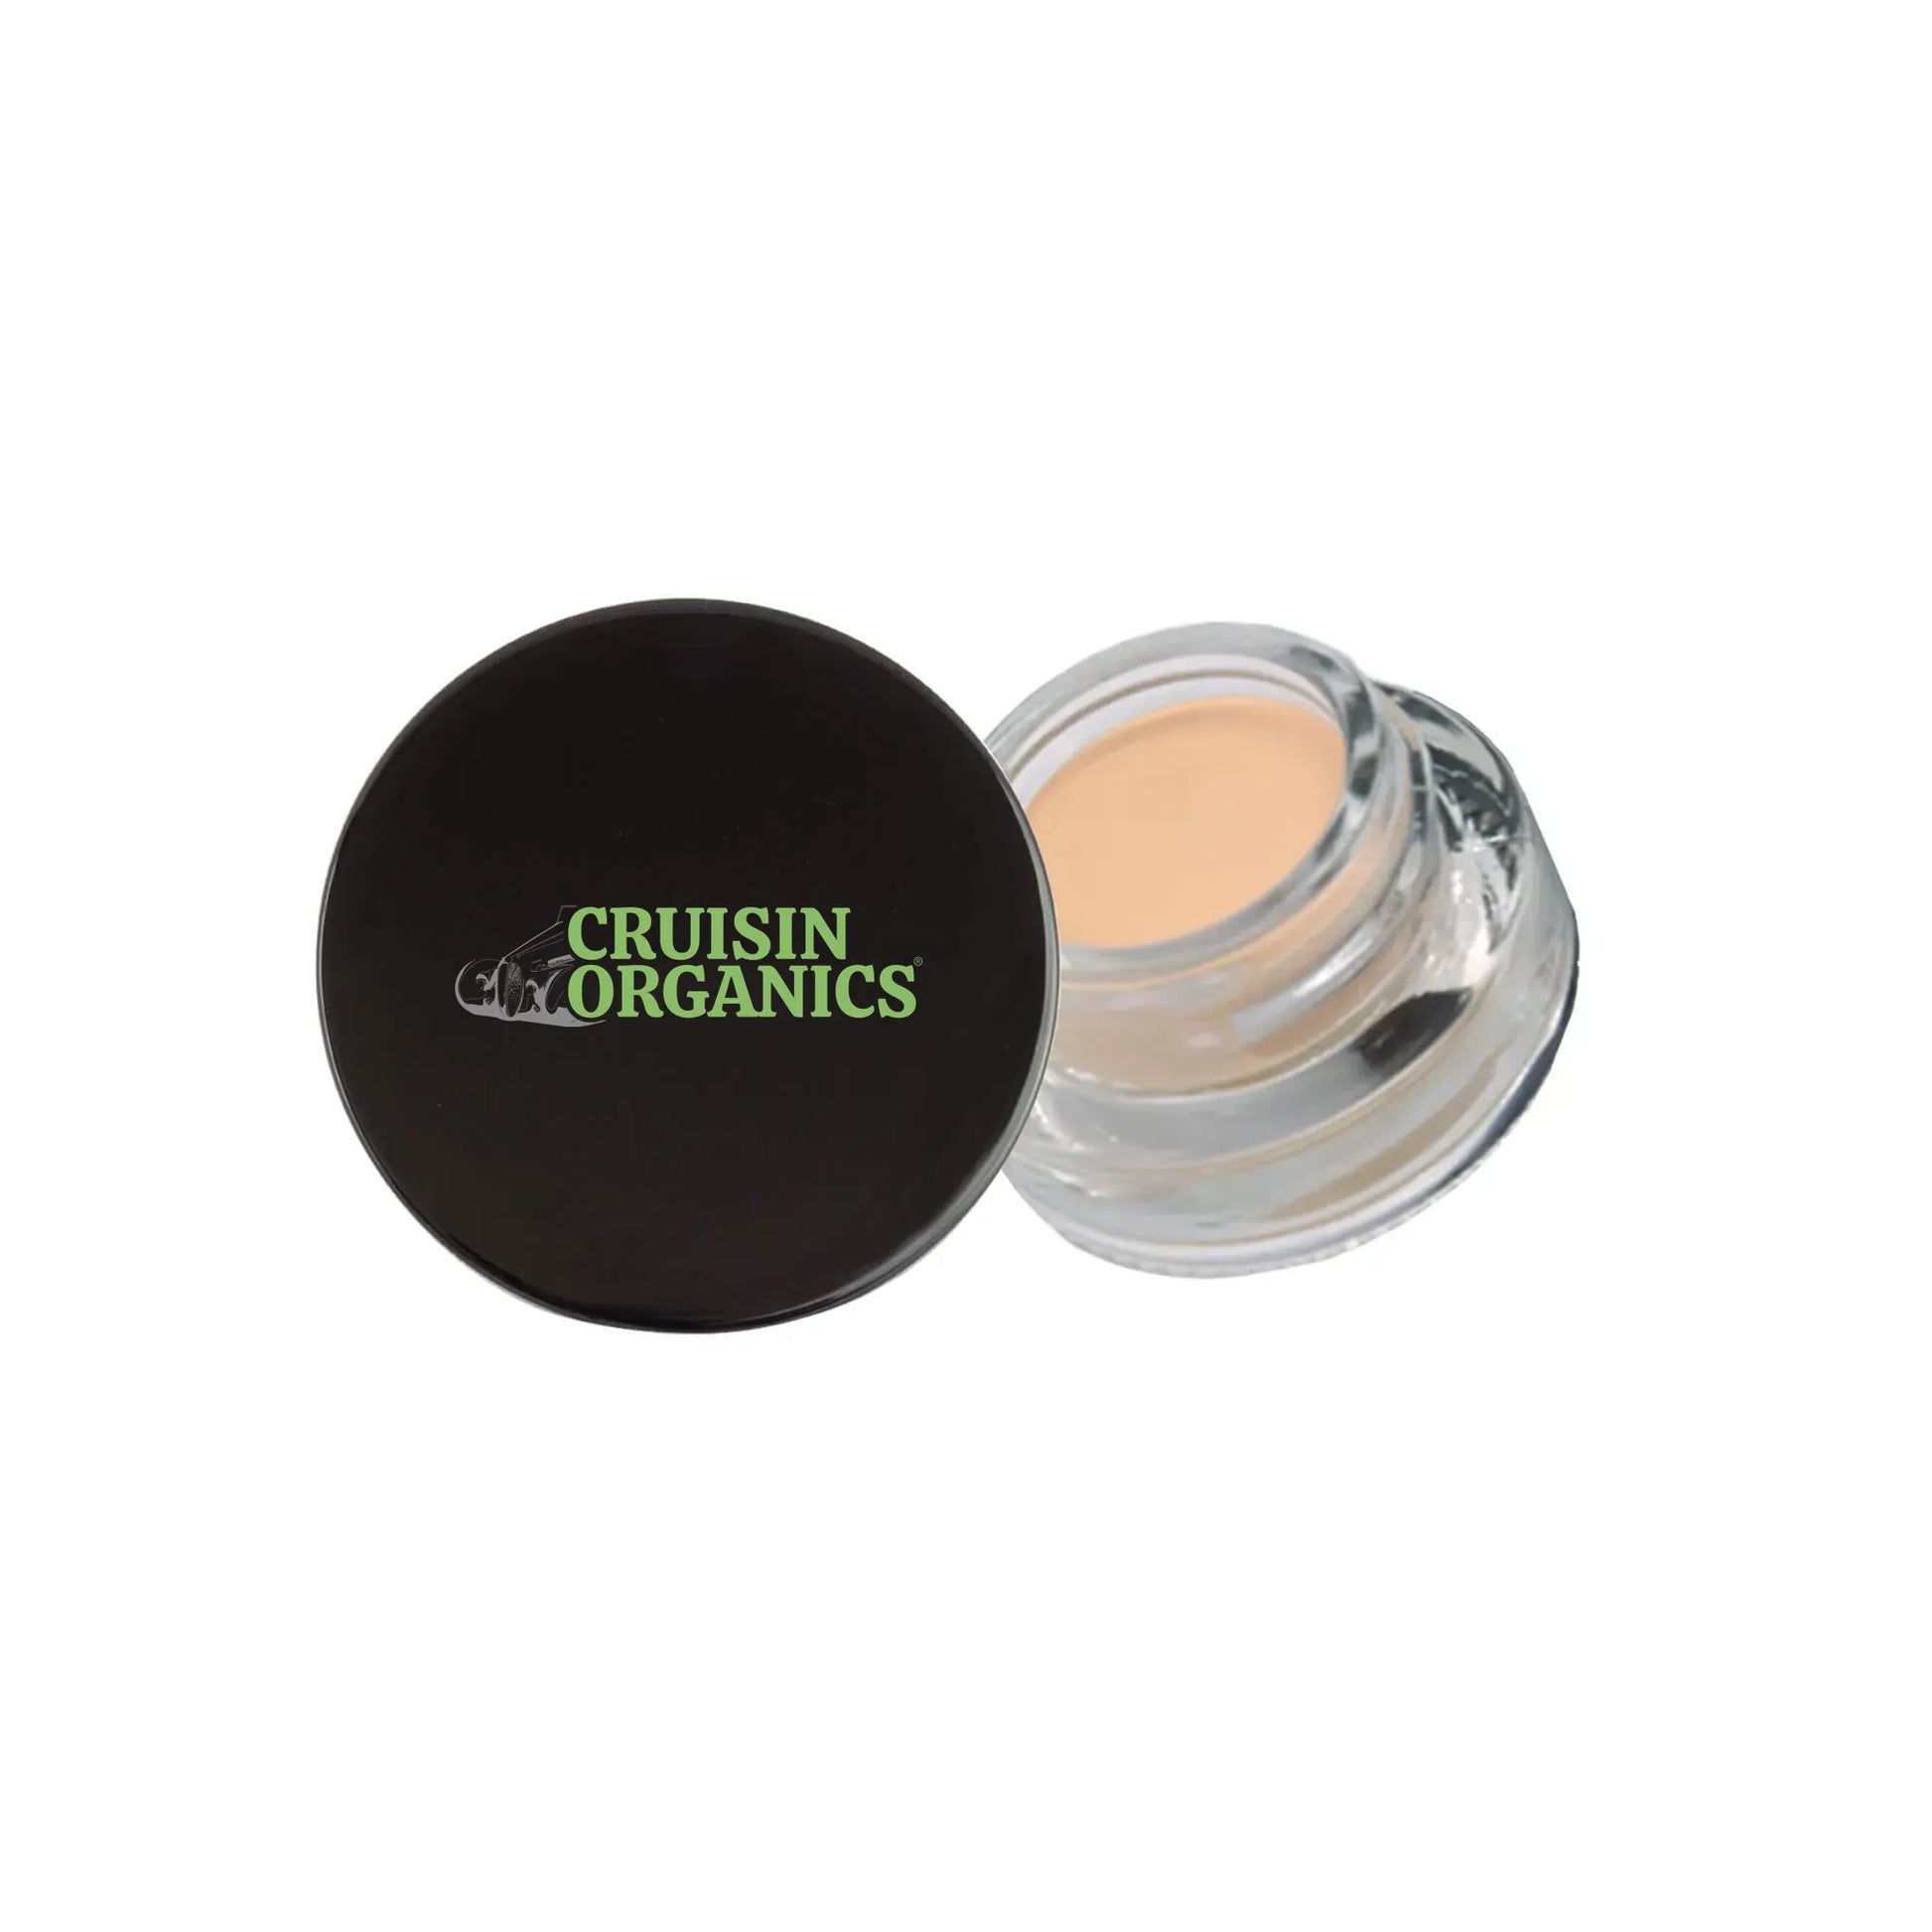 Cruisin Organics Eye Primer has arrived! Cover the imperfections and discolorations of your eyelids with our creamy silicone formula. With this eye primer, lasting blissful eyeshadow follow and no creases appear. Completely prevent creasing from happening  your eyeshadows. This primer is sheer, softening and azures impeccable application of color to your lids!